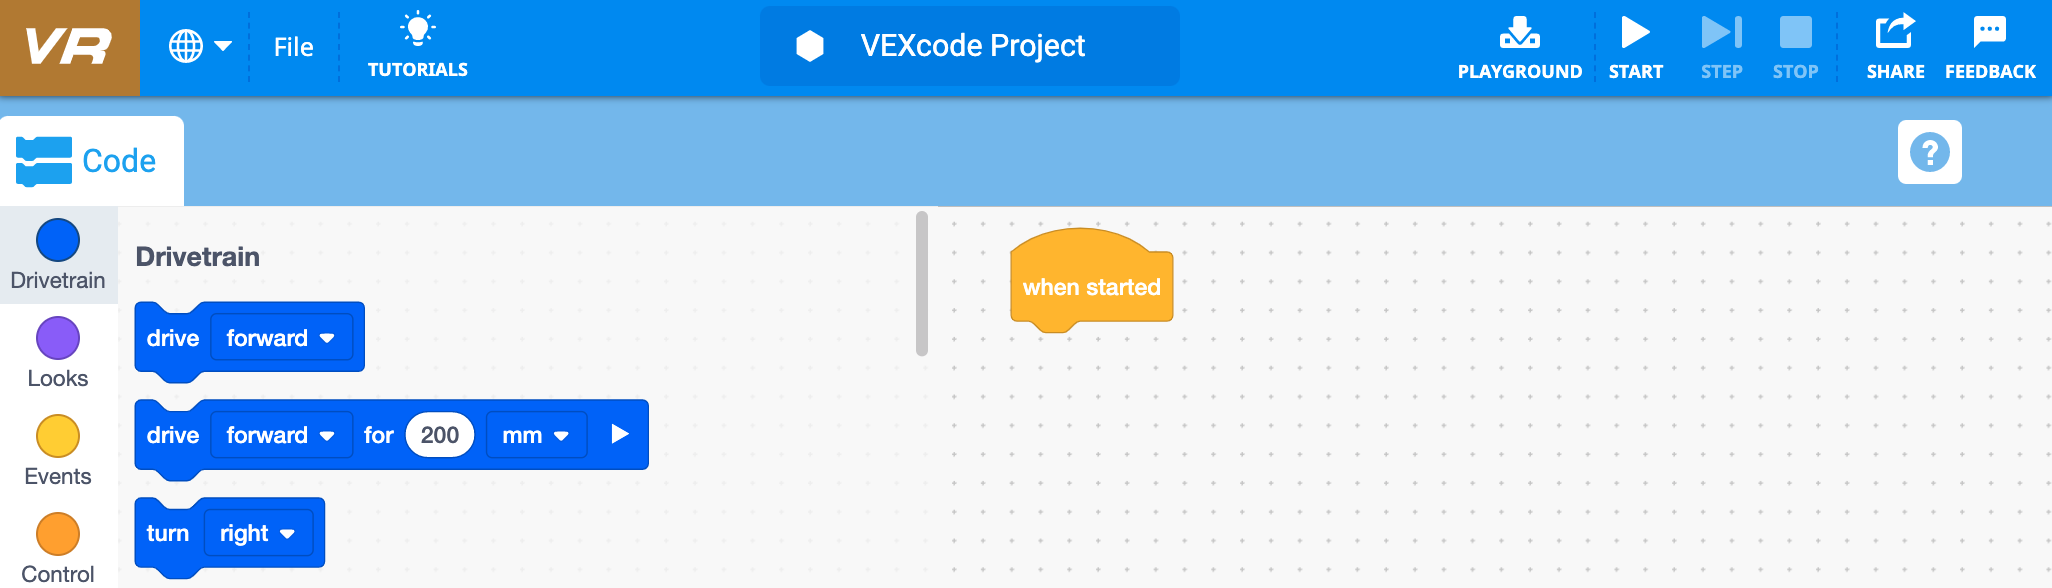 Inicie VEXcode VR